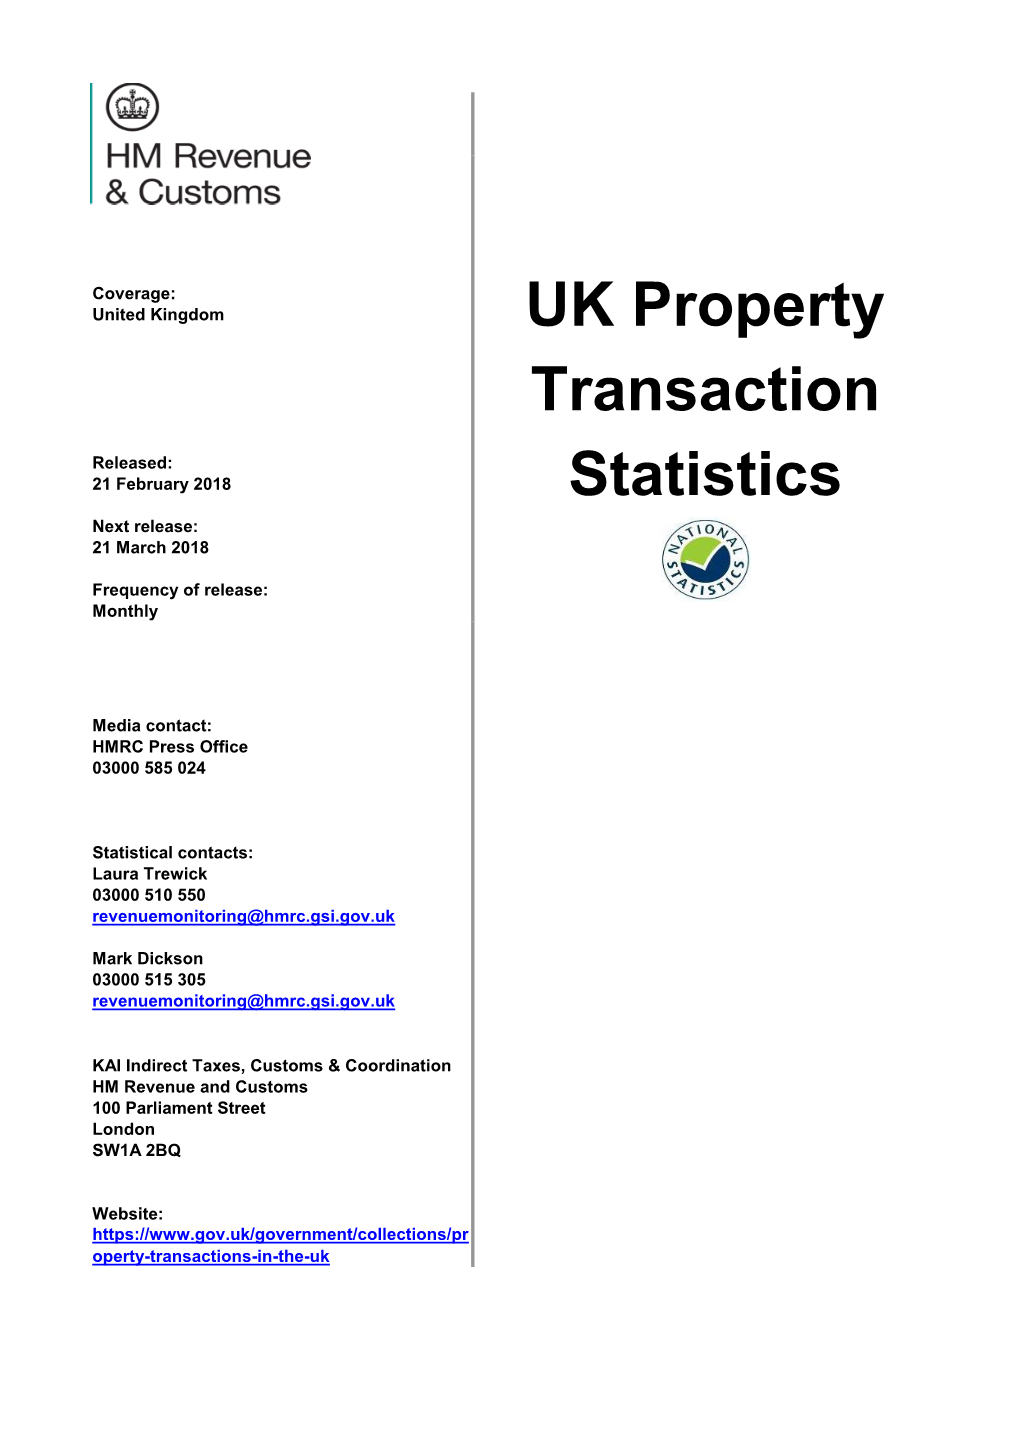 UK Property Transaction Statistics Are Used by Government and Policy Makers, Analysts, Academics, Media, Businesses, Public Bodies and the Public